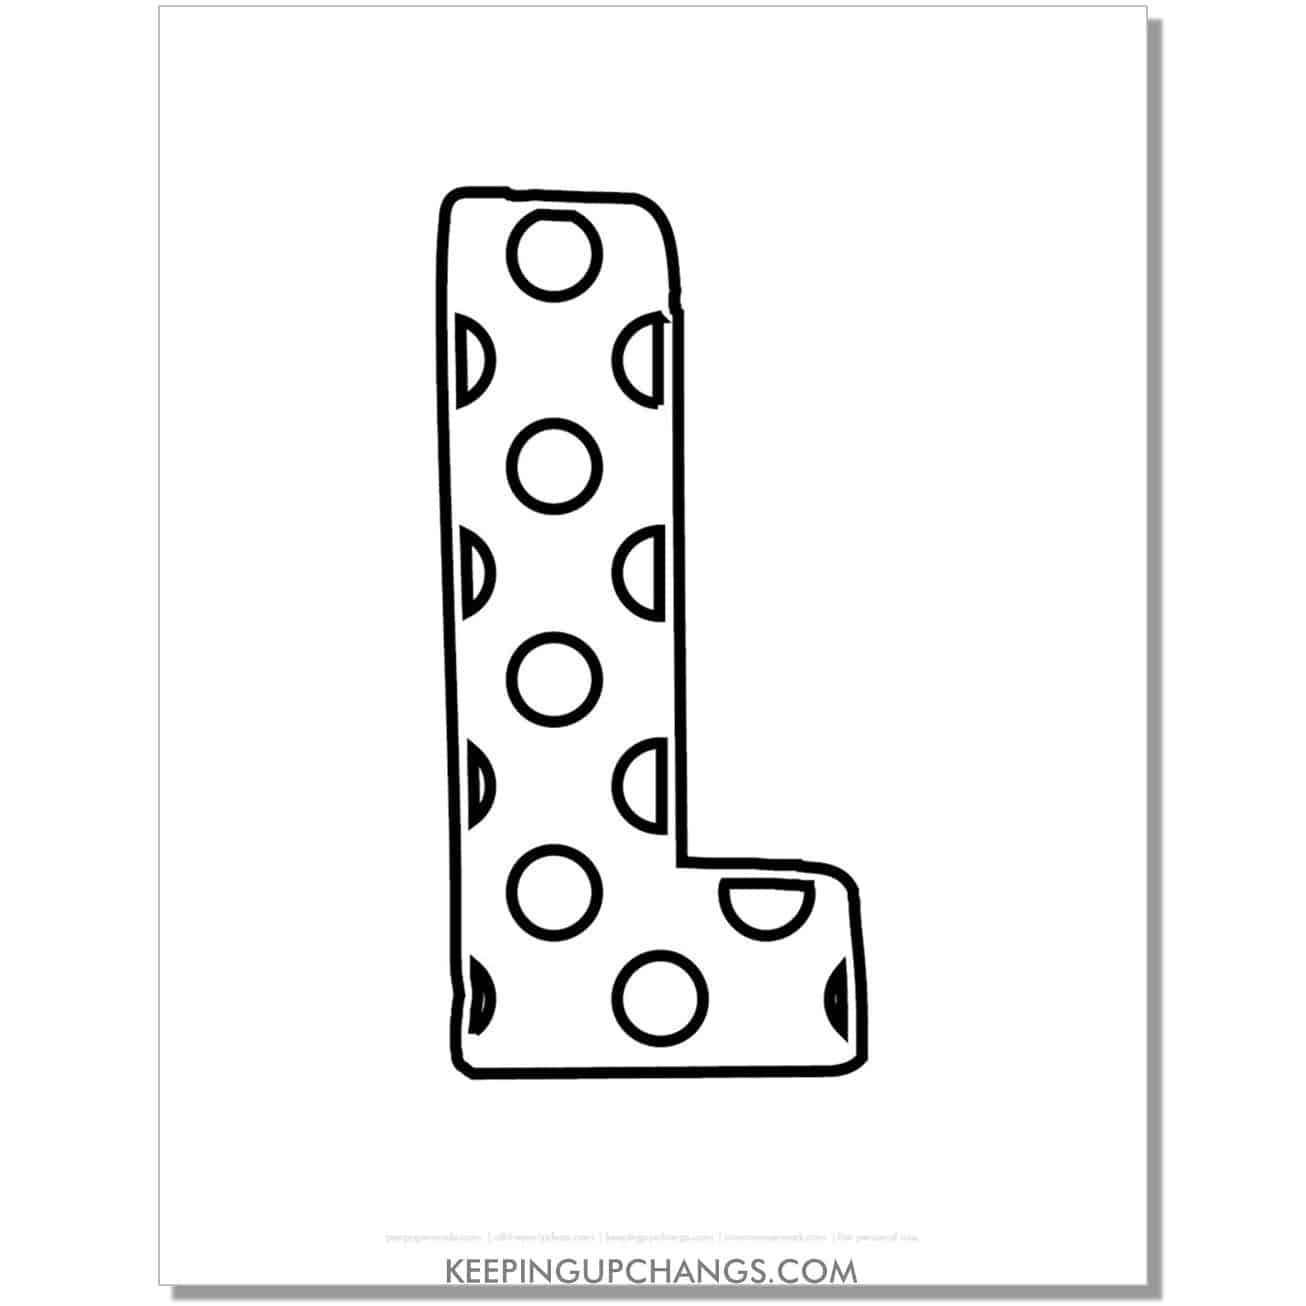 free alphabet letter l coloring page with polka dots for toddlers, preschool, kindergarten.